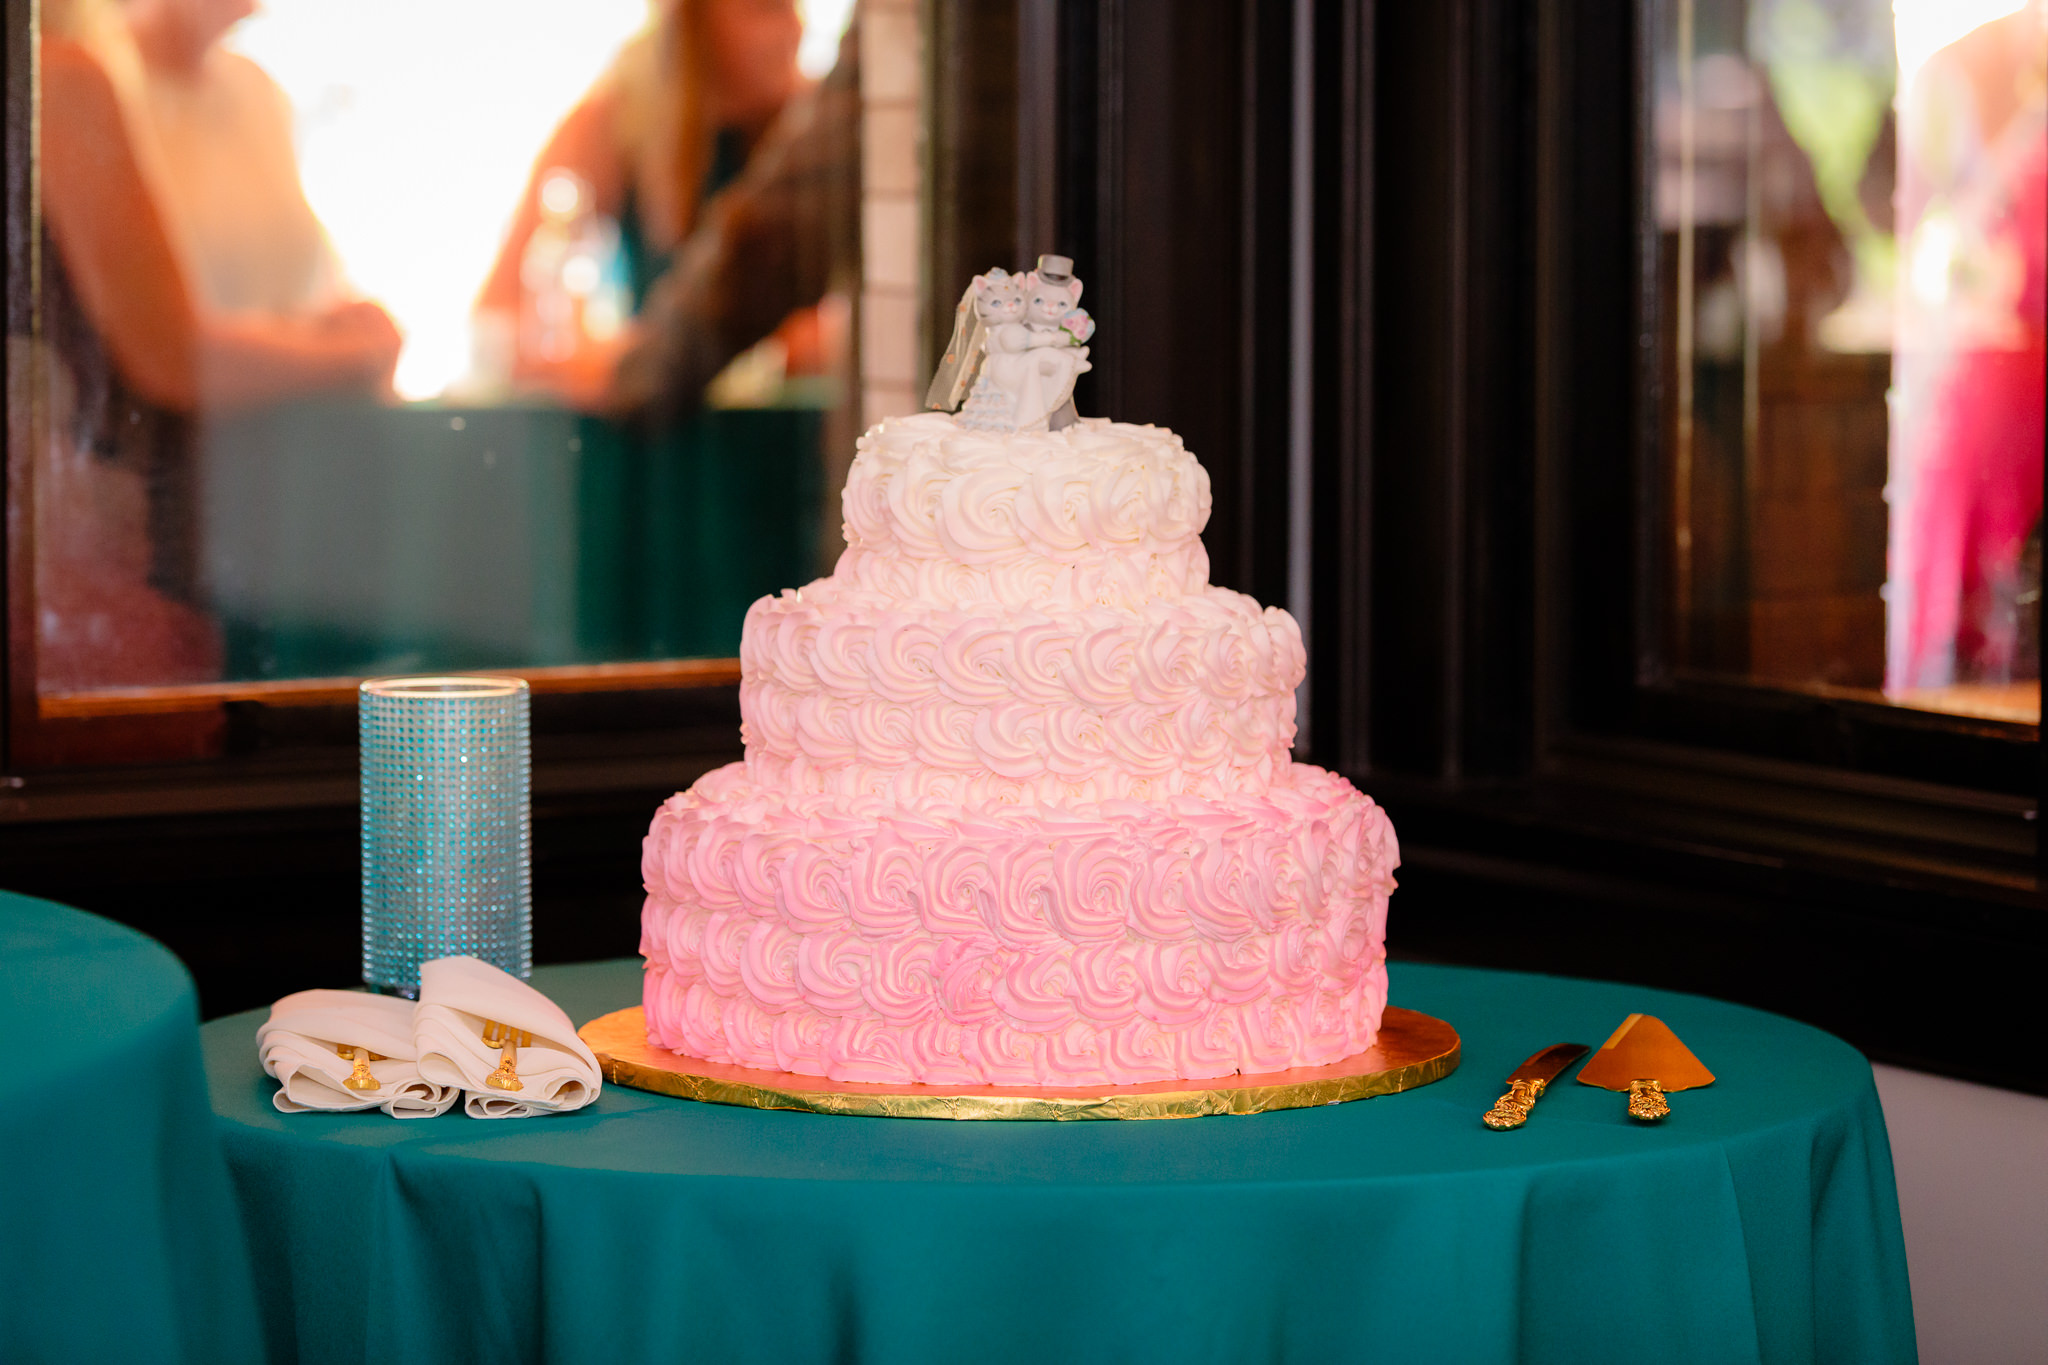 Pink ombre wedding cake with cat cake toppers by Kretchmar's Bakery at Beaver Station